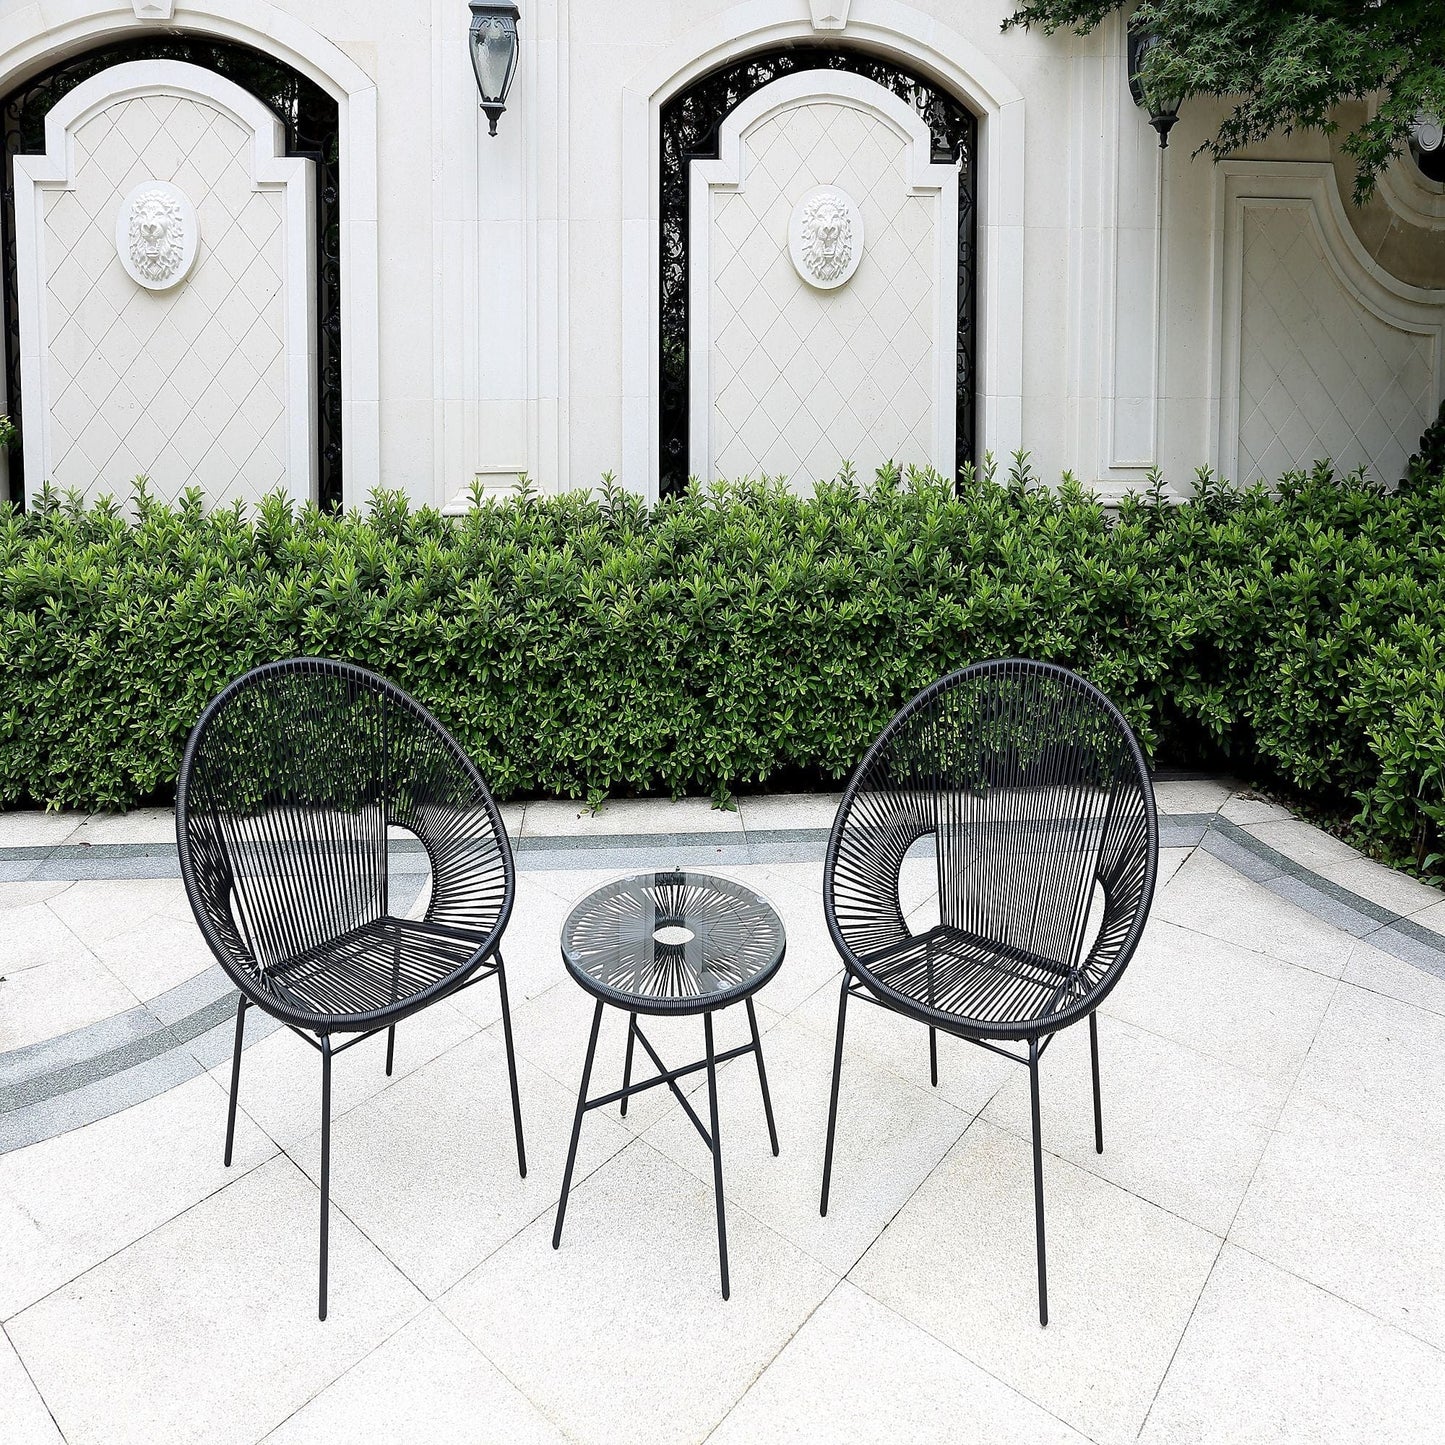 Dreamline Outdoor Furniture Garden Patio Seating Set (1+2) - 2 Chairs And Table Set